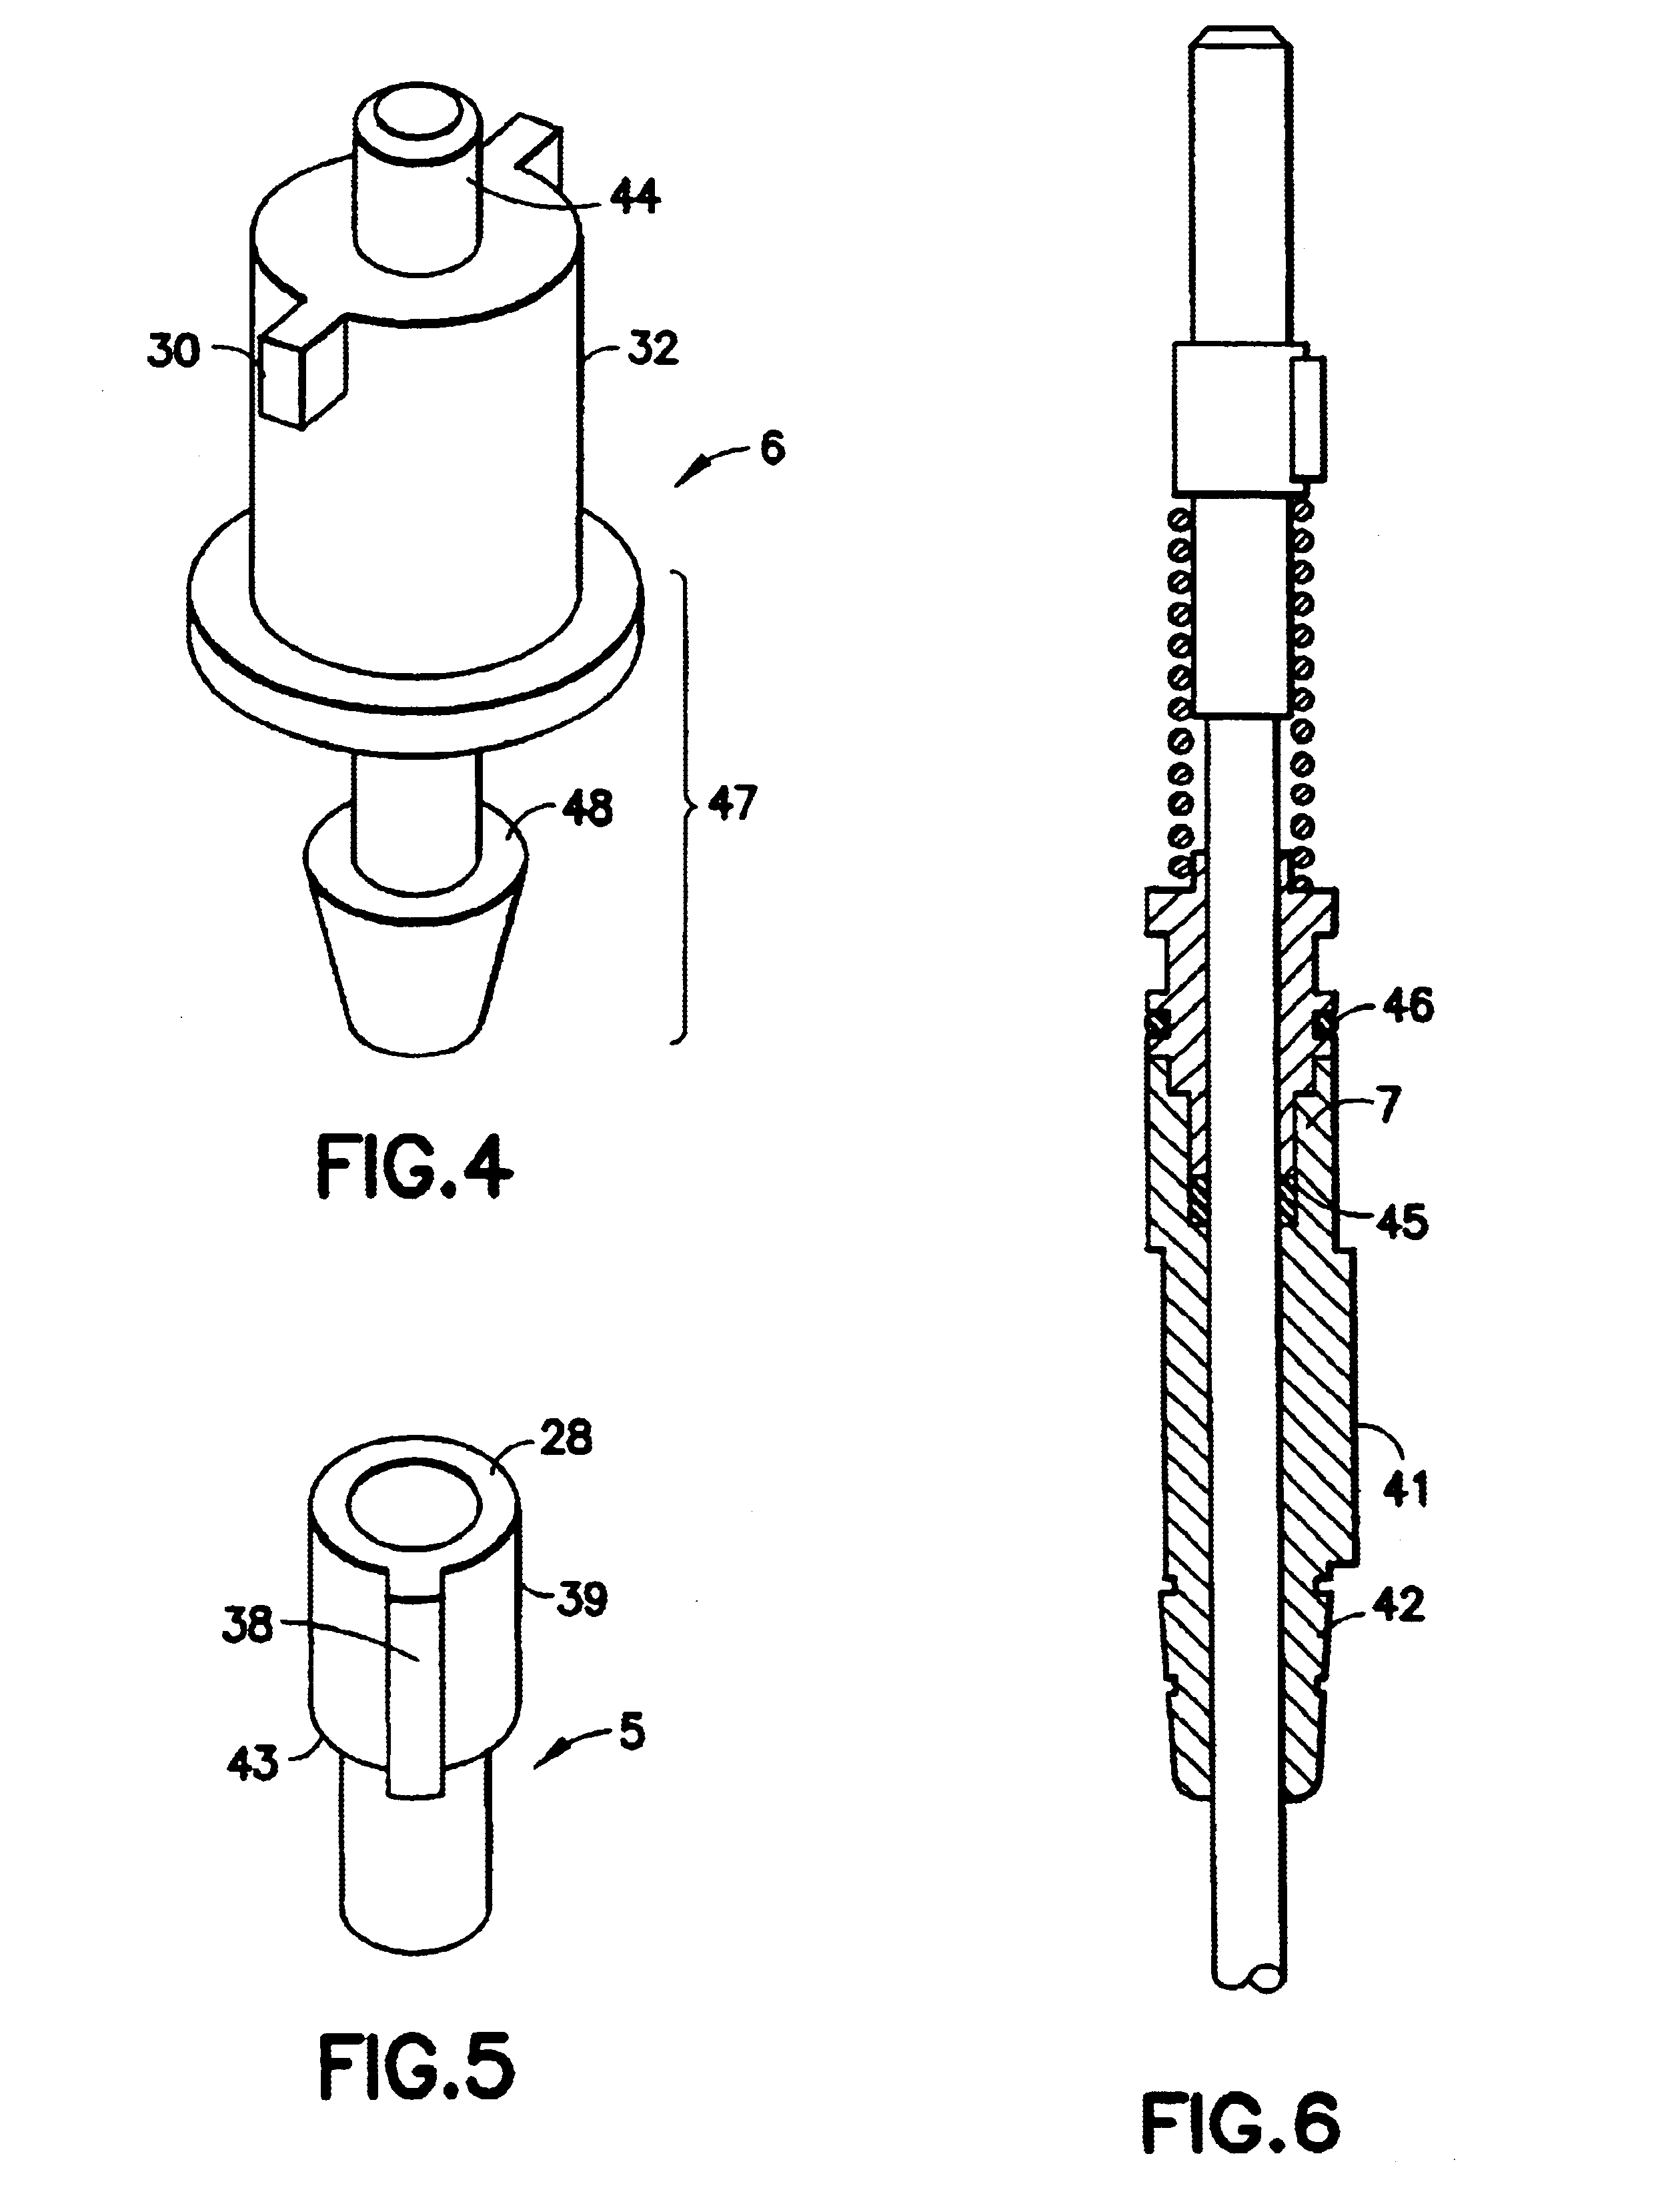 Easy-to-mount optical connector system